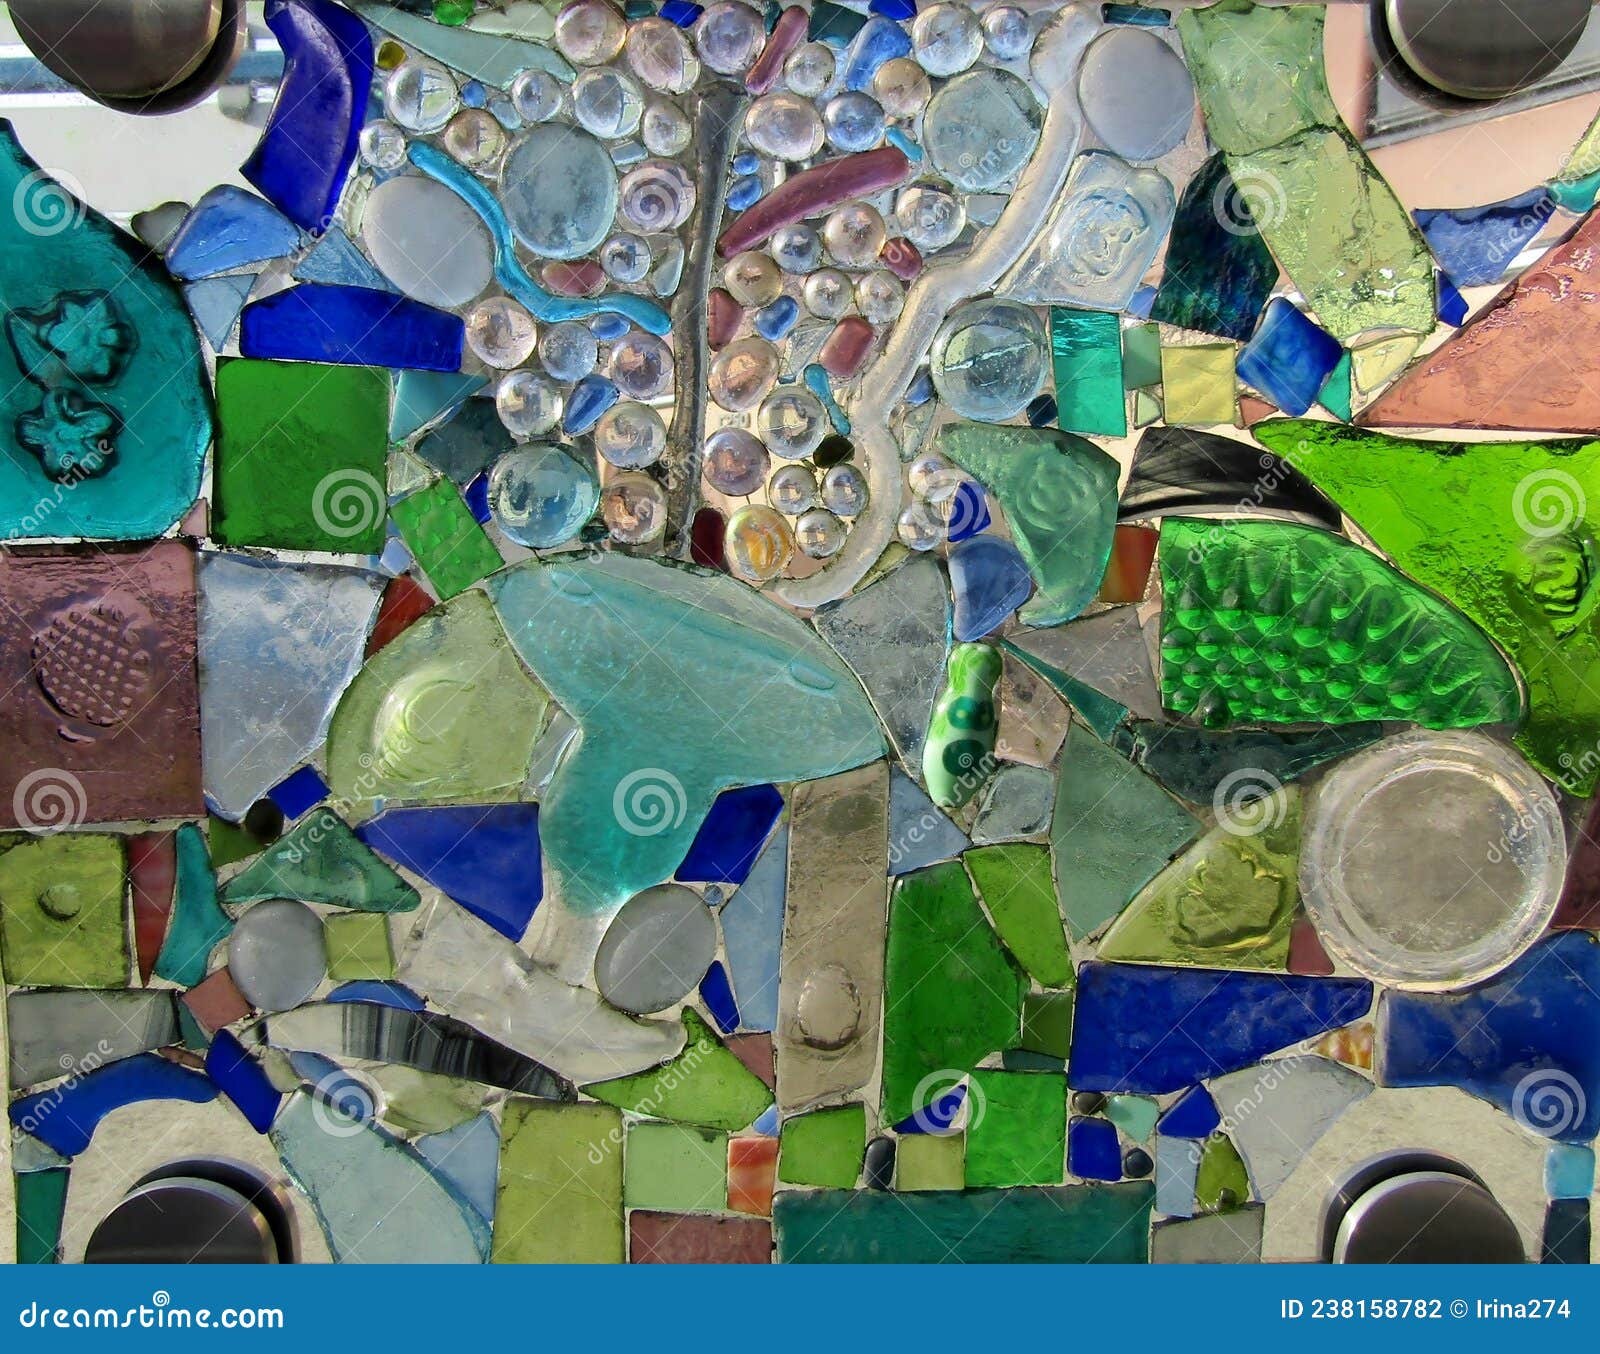 fused recycled glass bottle panel.